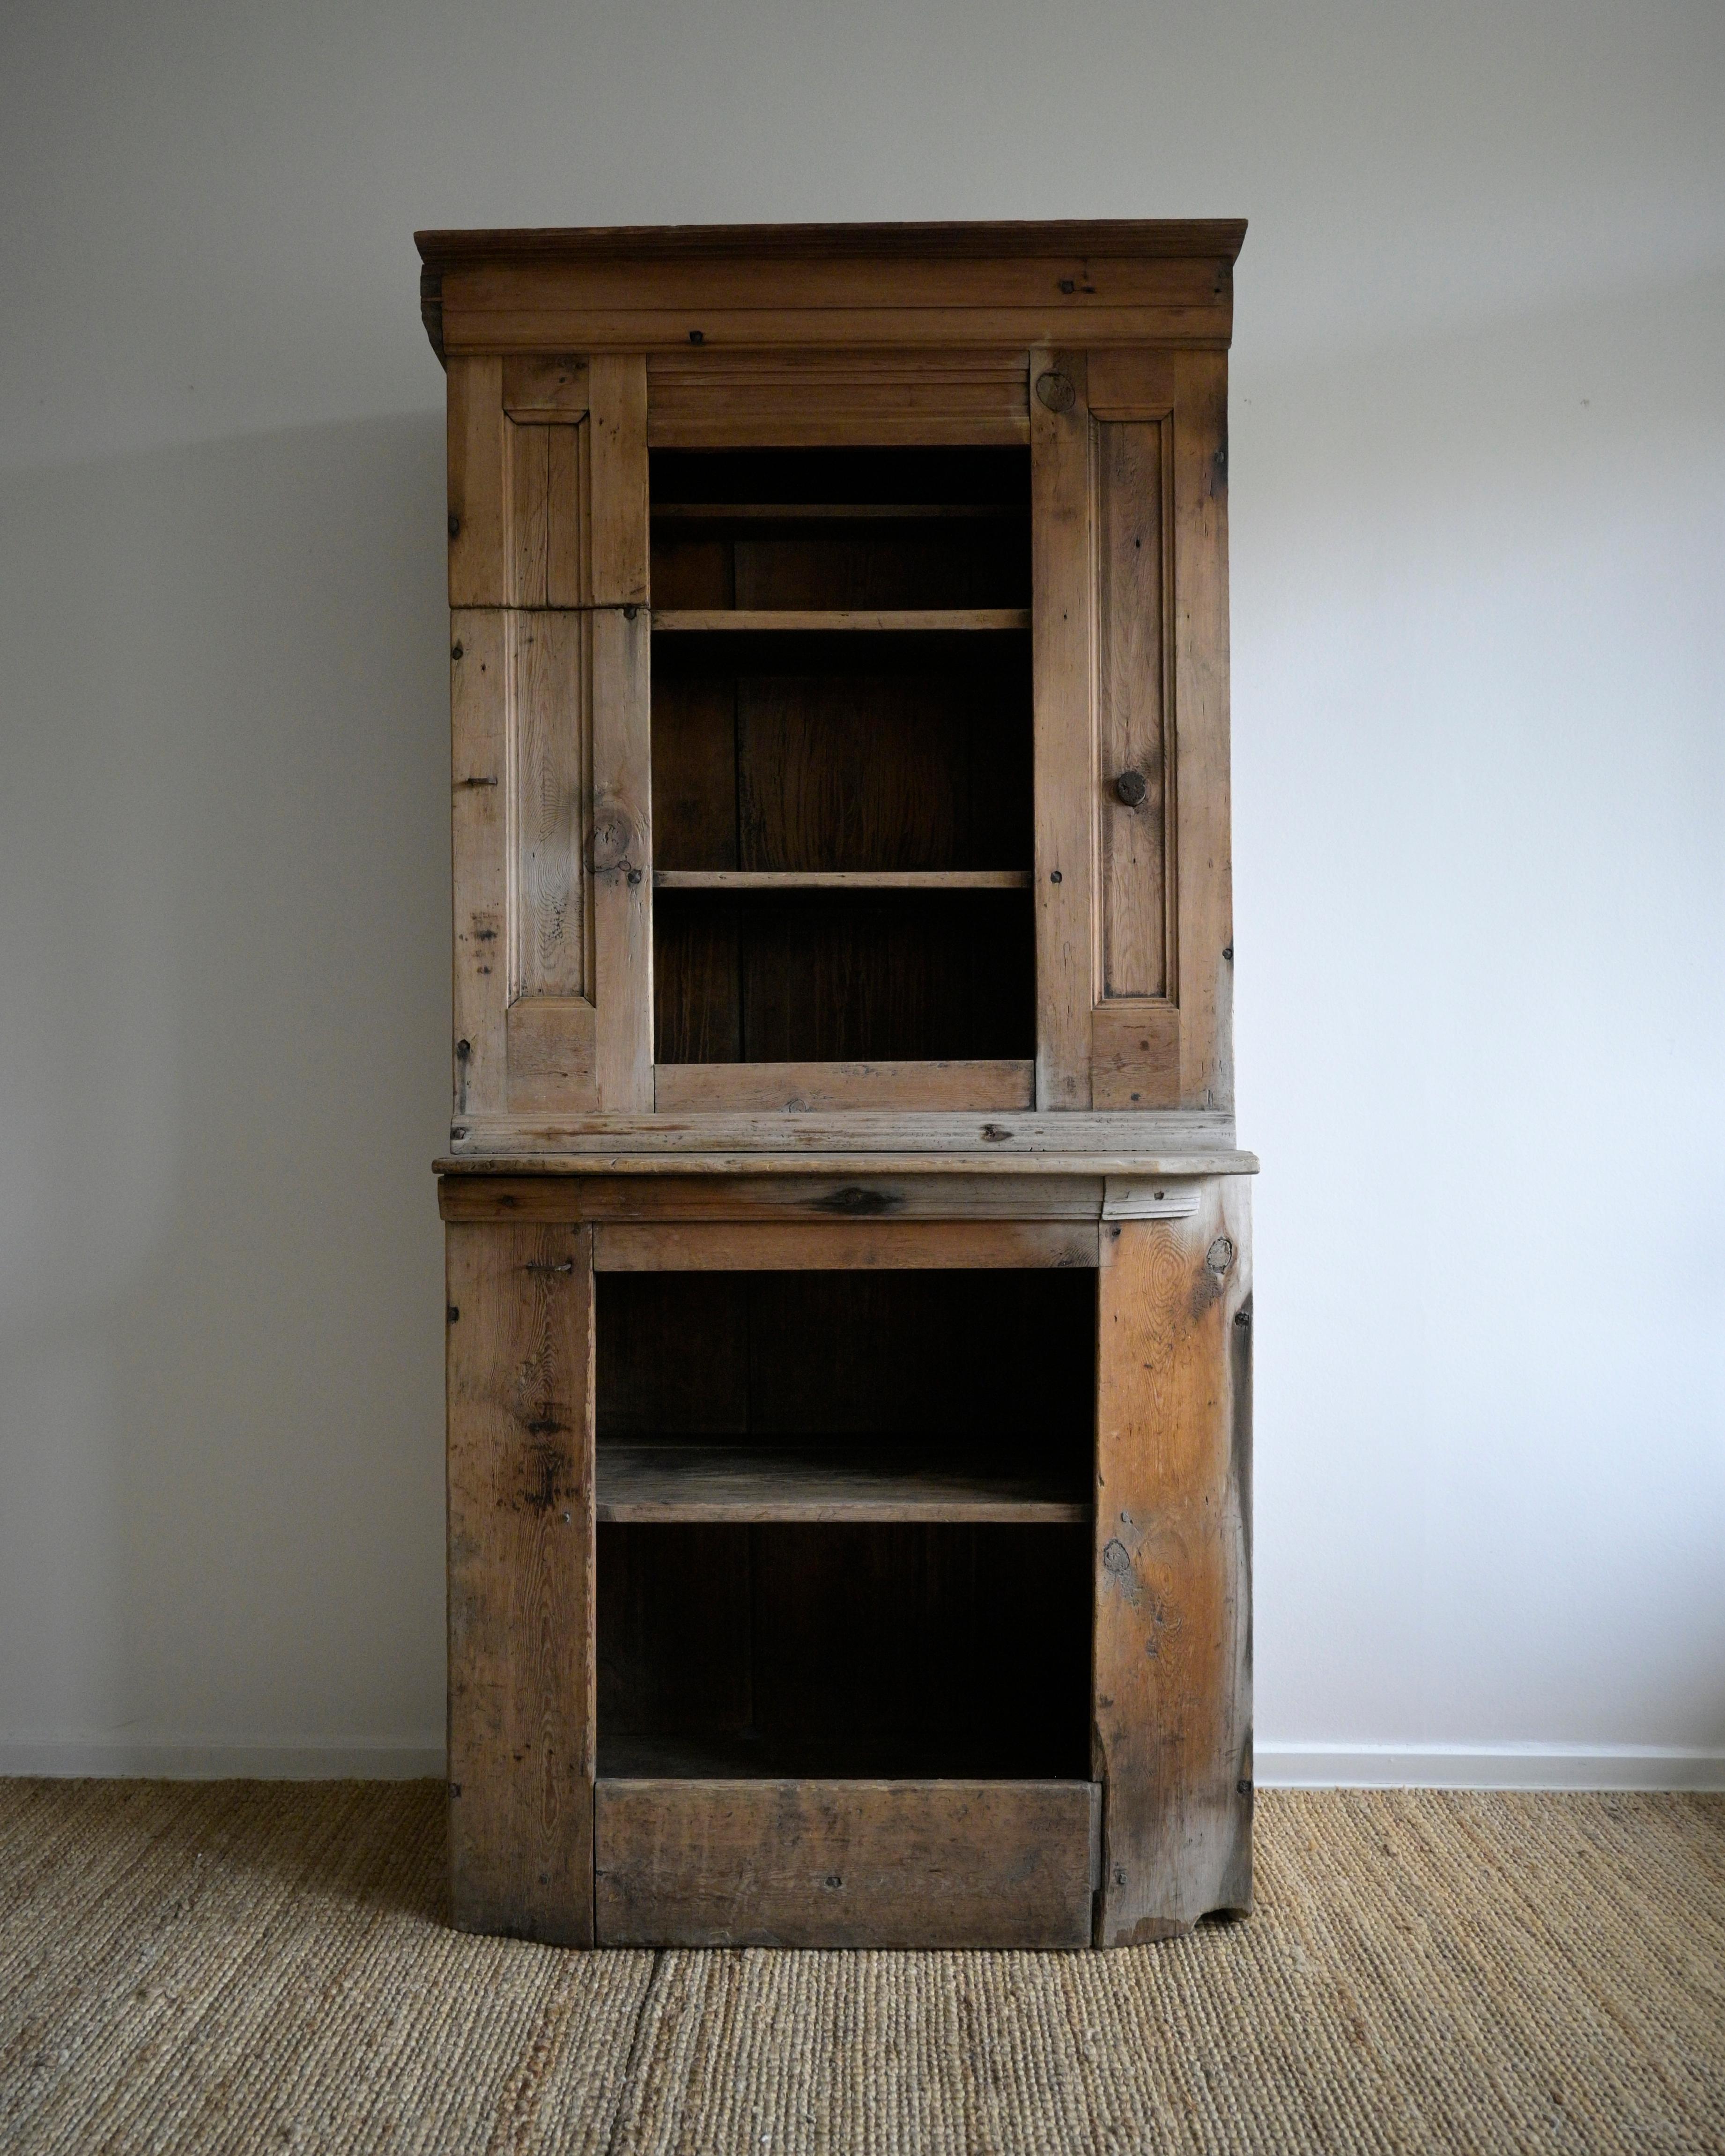 Swedish primitive Cabinet from the early 18th Century

Made of Pine wood.

Untouched by paint or excessively restoration, with a natural patina that only time can create.

It has a hidden compartment in the upper left corner.

The wood has been